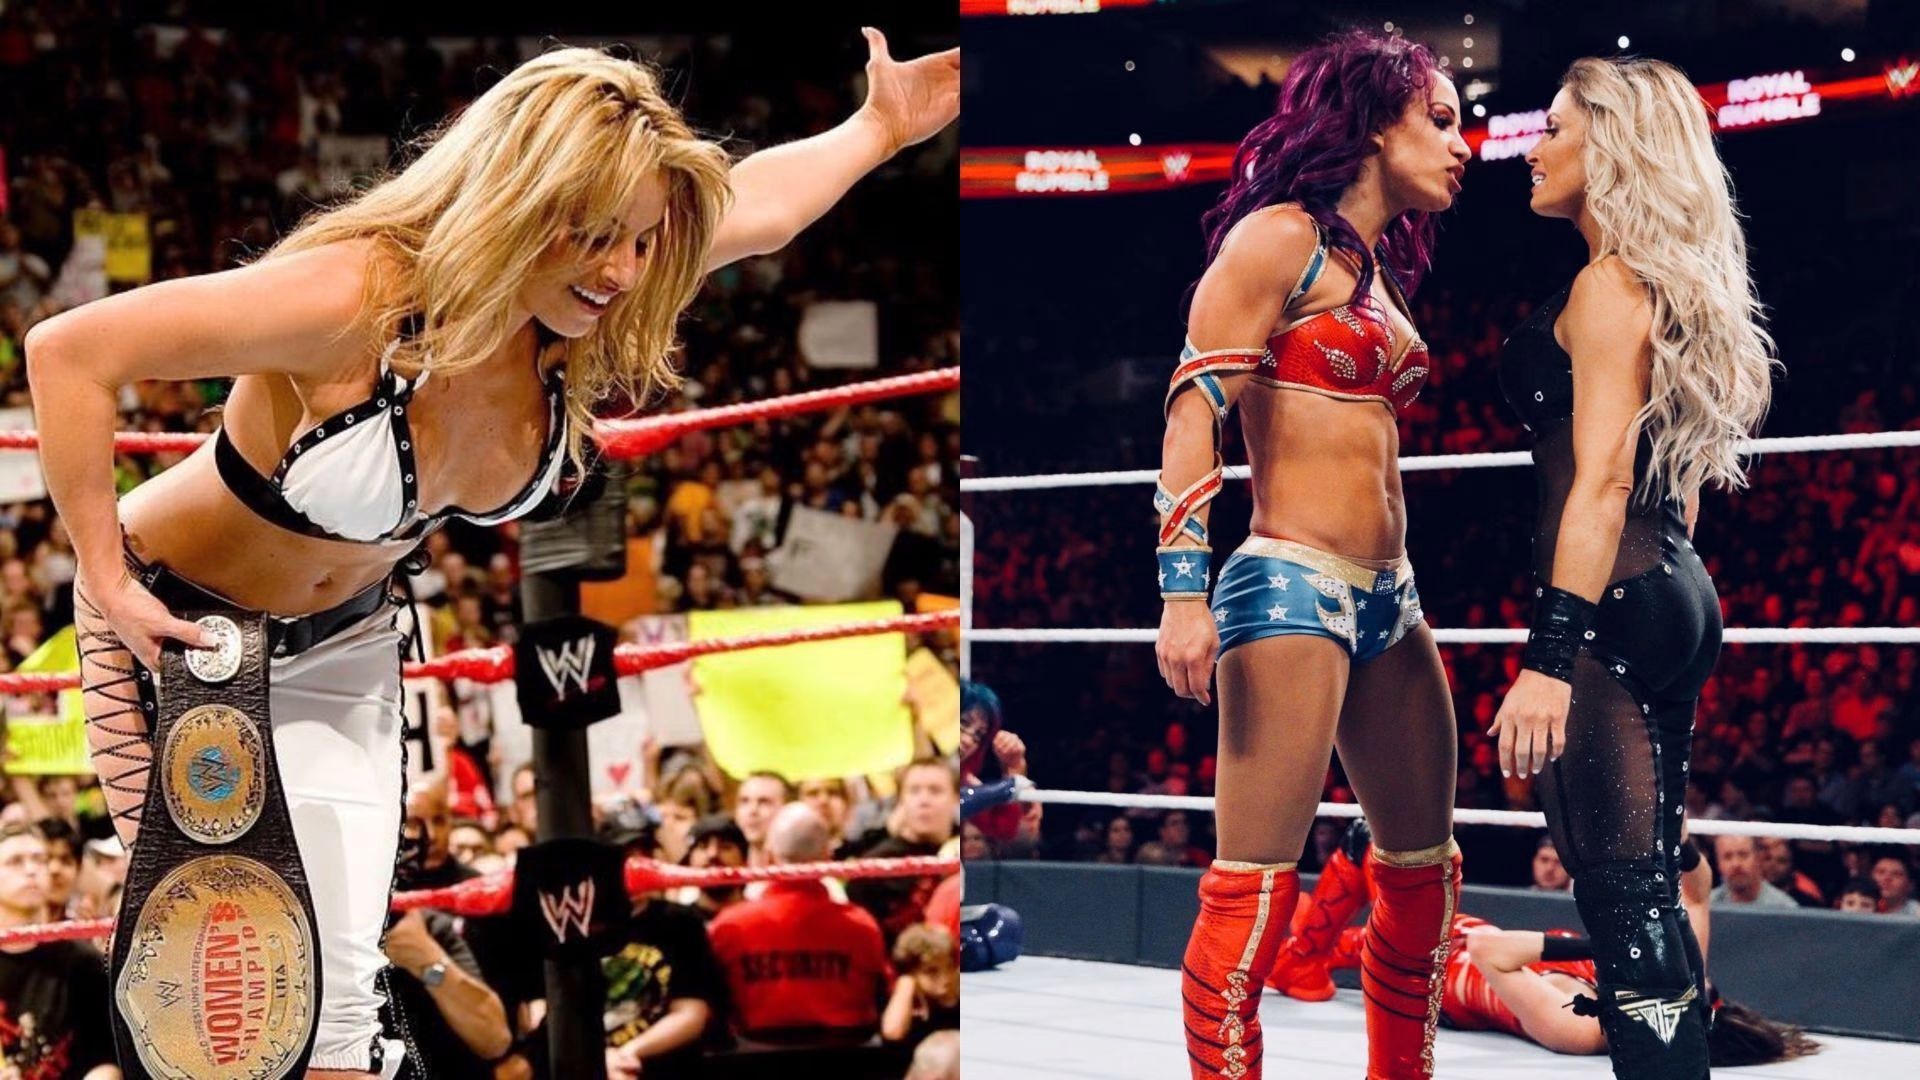 Trish Stratus and Sasha Banks could be a great match to add to the list of great Trish matches